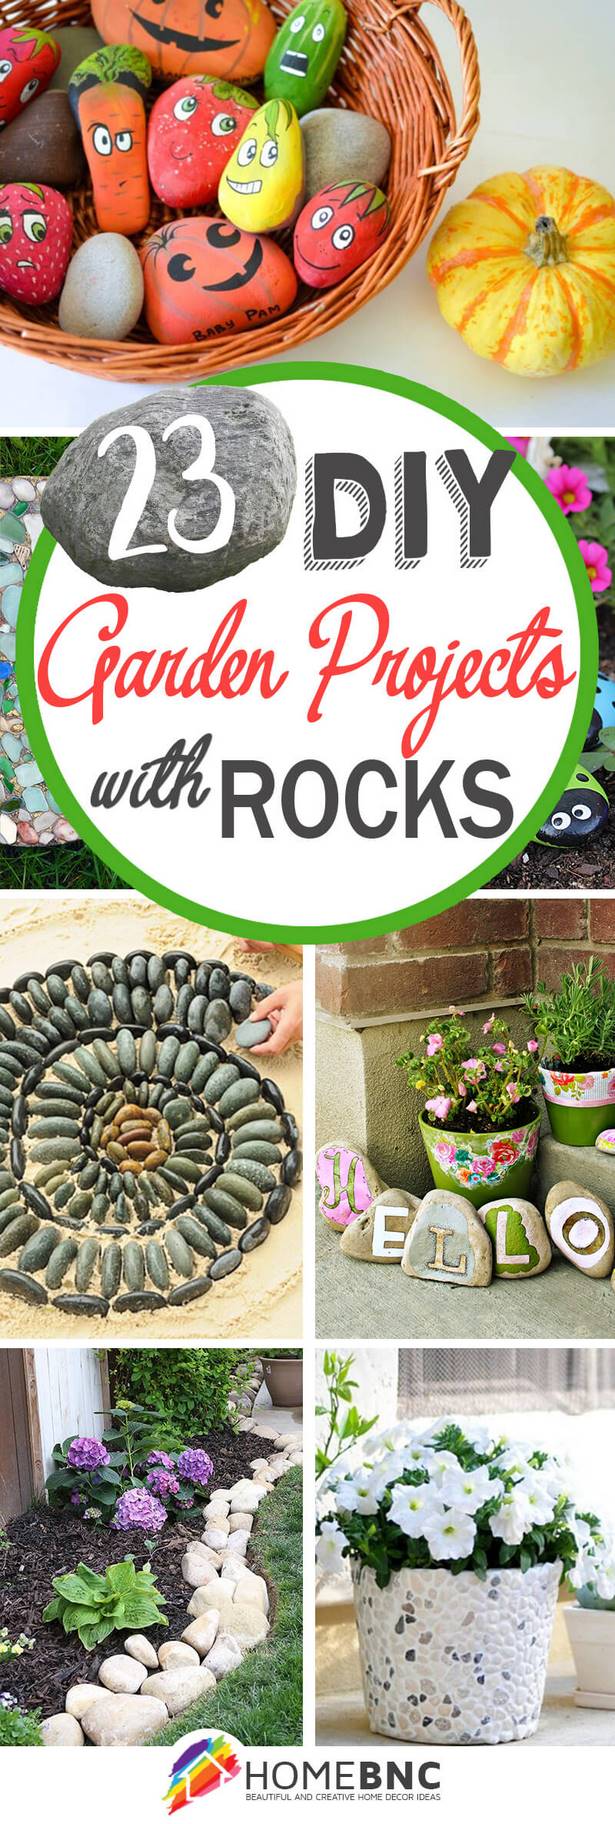 flower-garden-ideas-with-rocks-05_14 Идеи за цветна градина с камъни